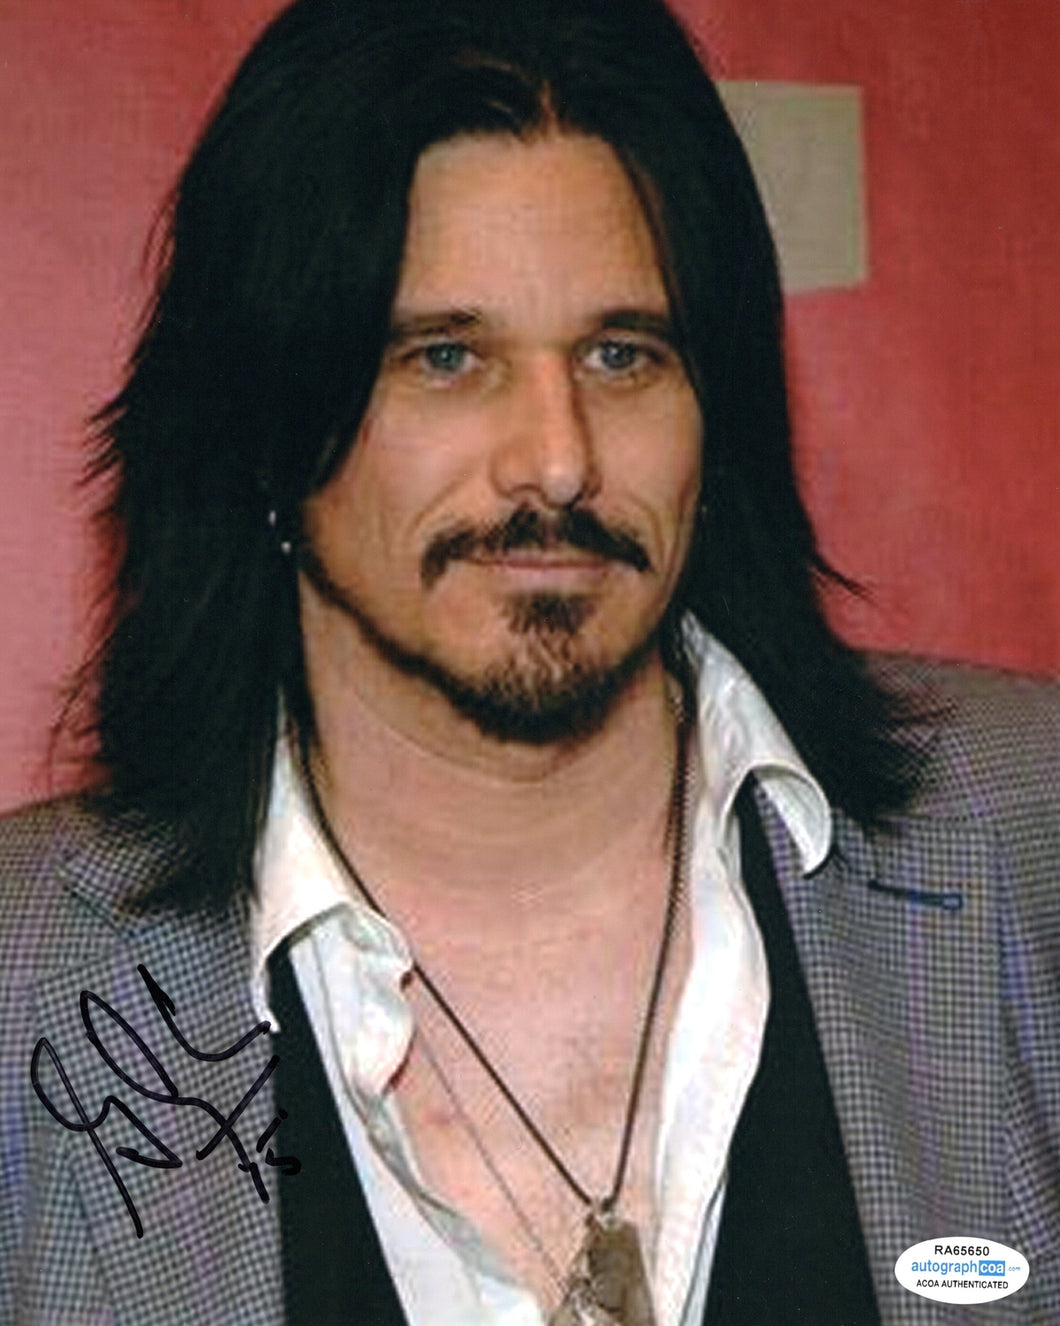 Guns N' Roses Gilby Clarke Autographed Signed 8x10 Photo